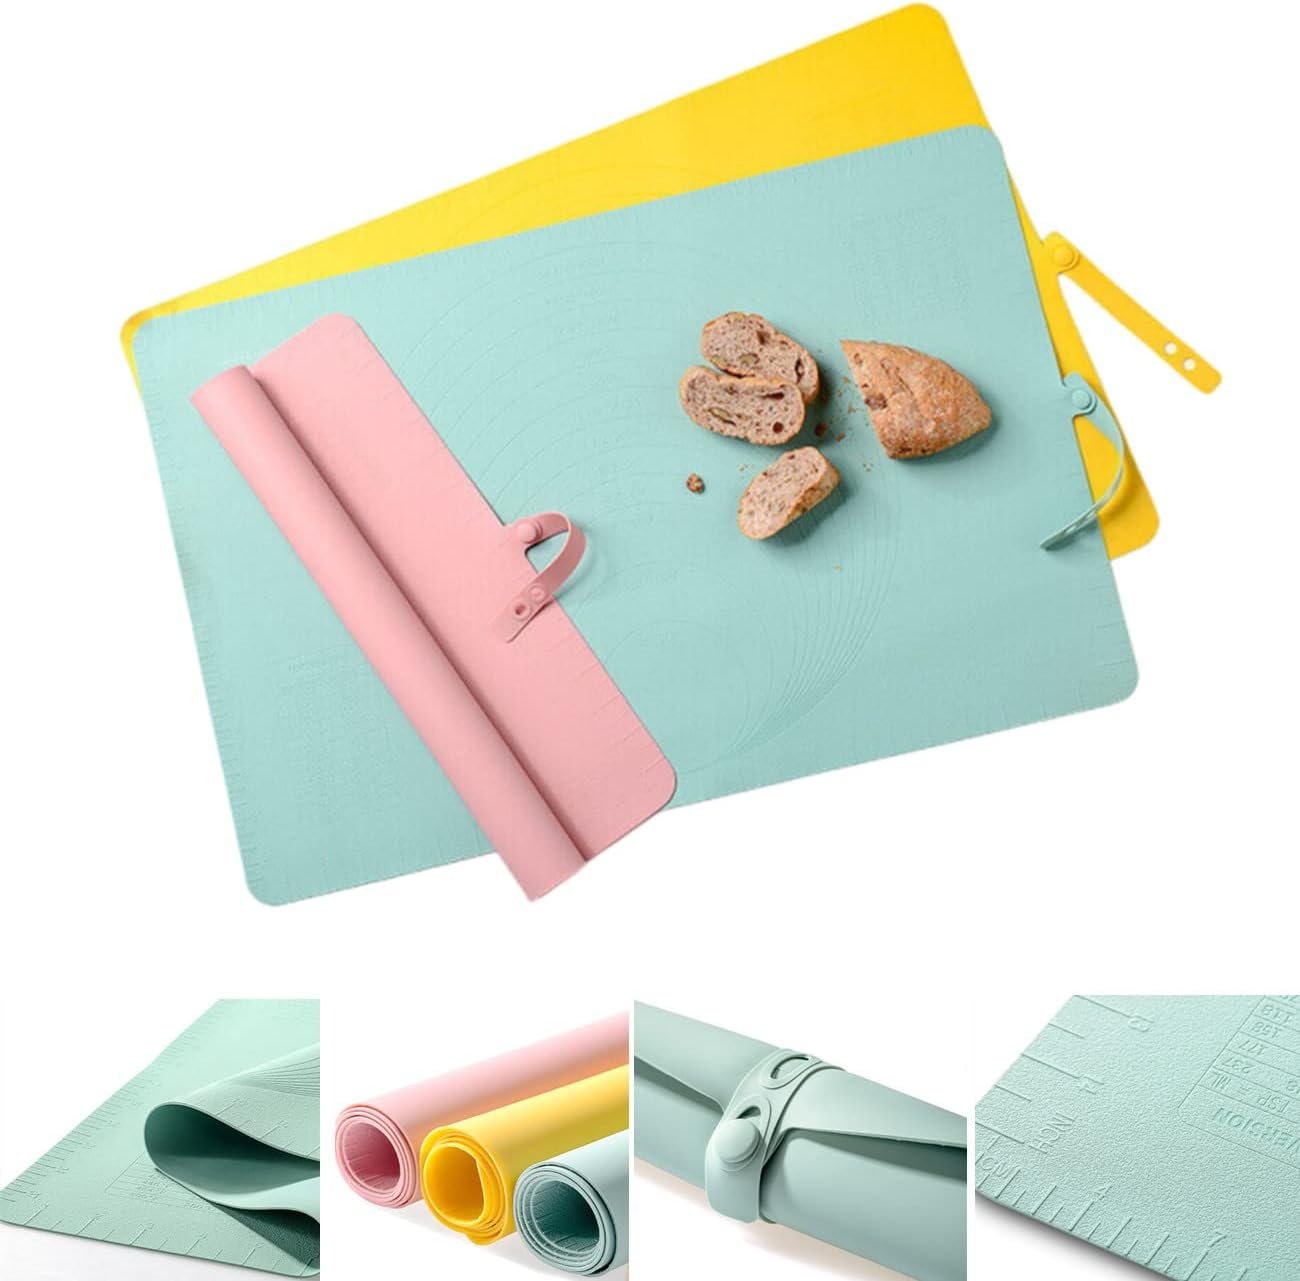 Extra Large Silicone Baking Mat Extra Large Kitchen Silicone Pad  Multifunctional Non Slip Non Stick Silicone Pastry Mats Can Be Rolled up  Large